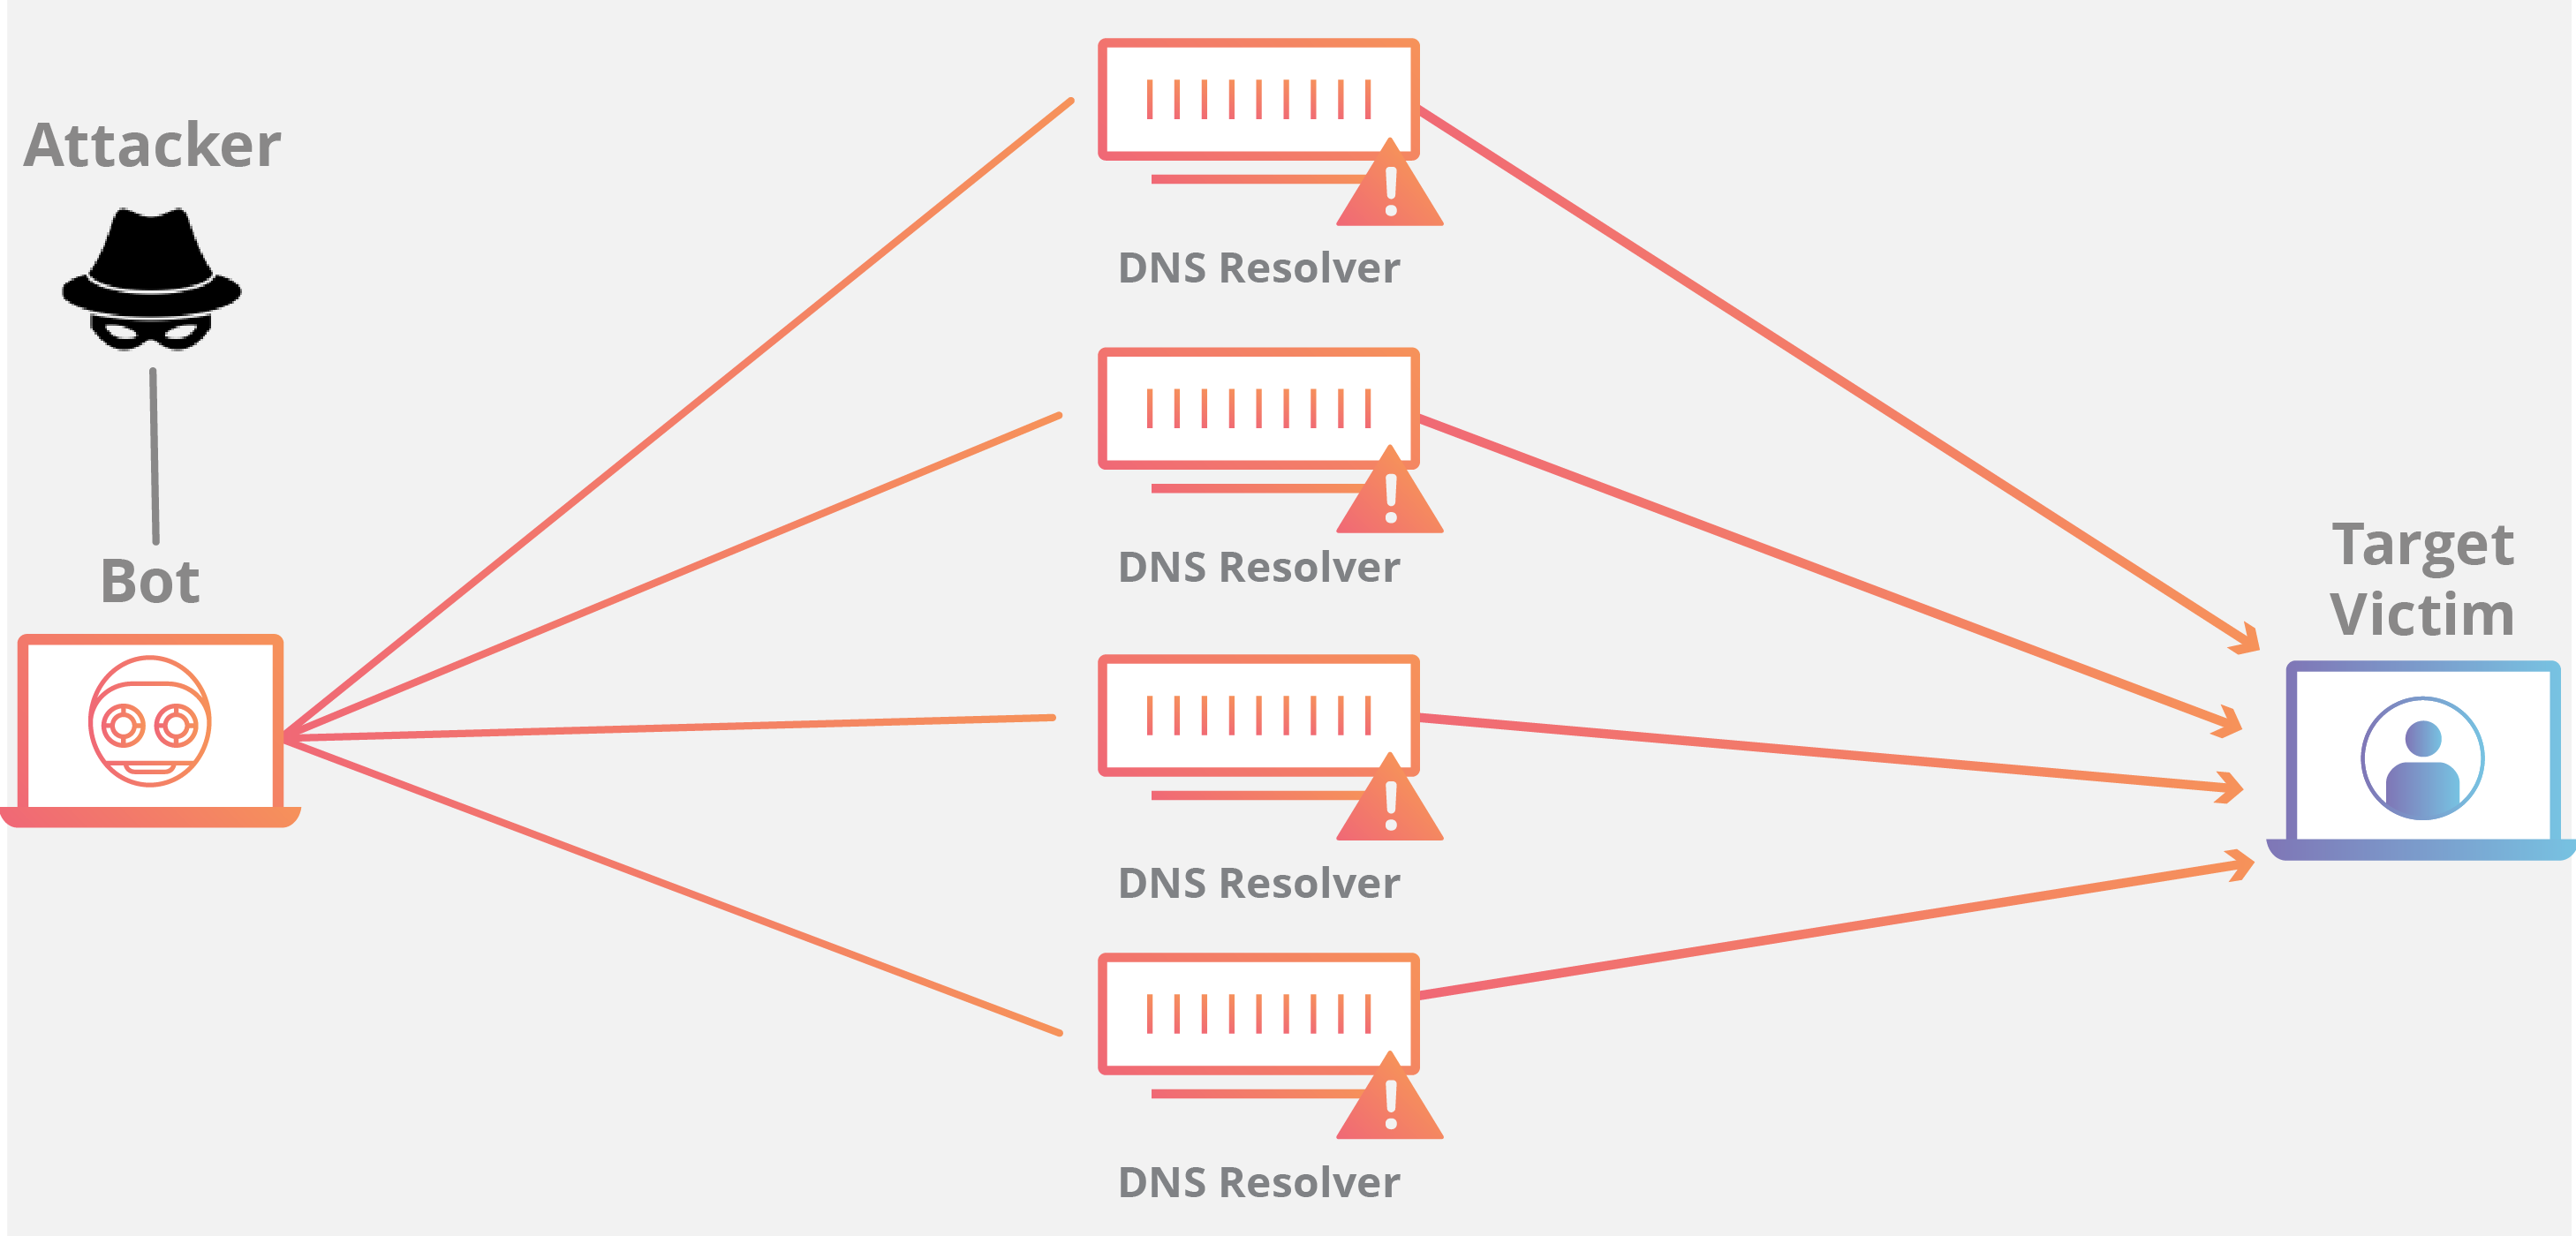 NTP Amplification Attack